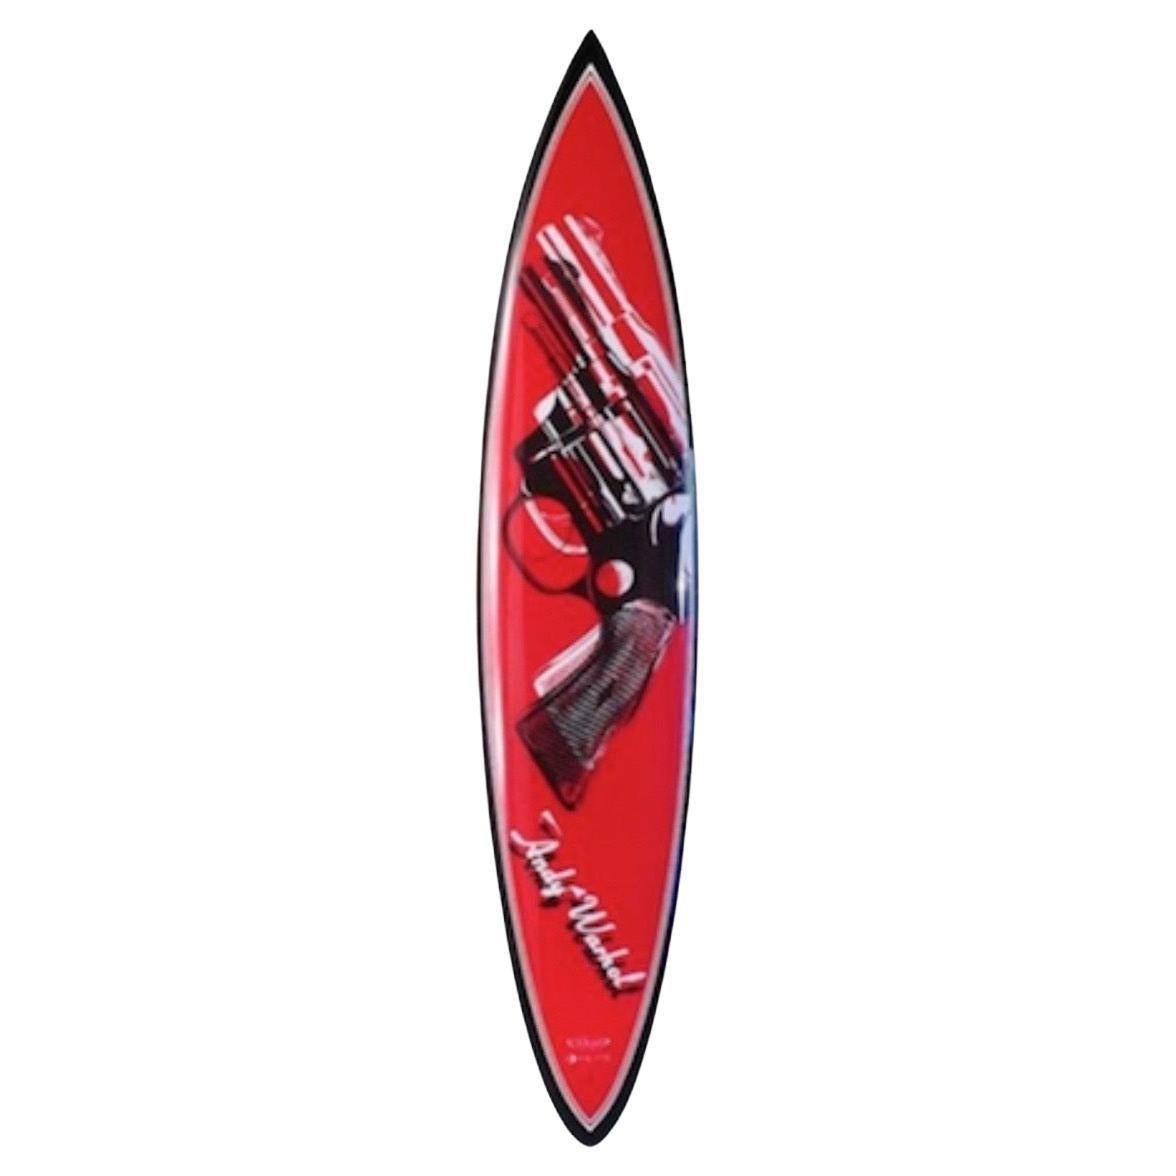 Limited Edition "Revolver" Surfboard / Sculpture by Andy Warhol & Tim Bessell